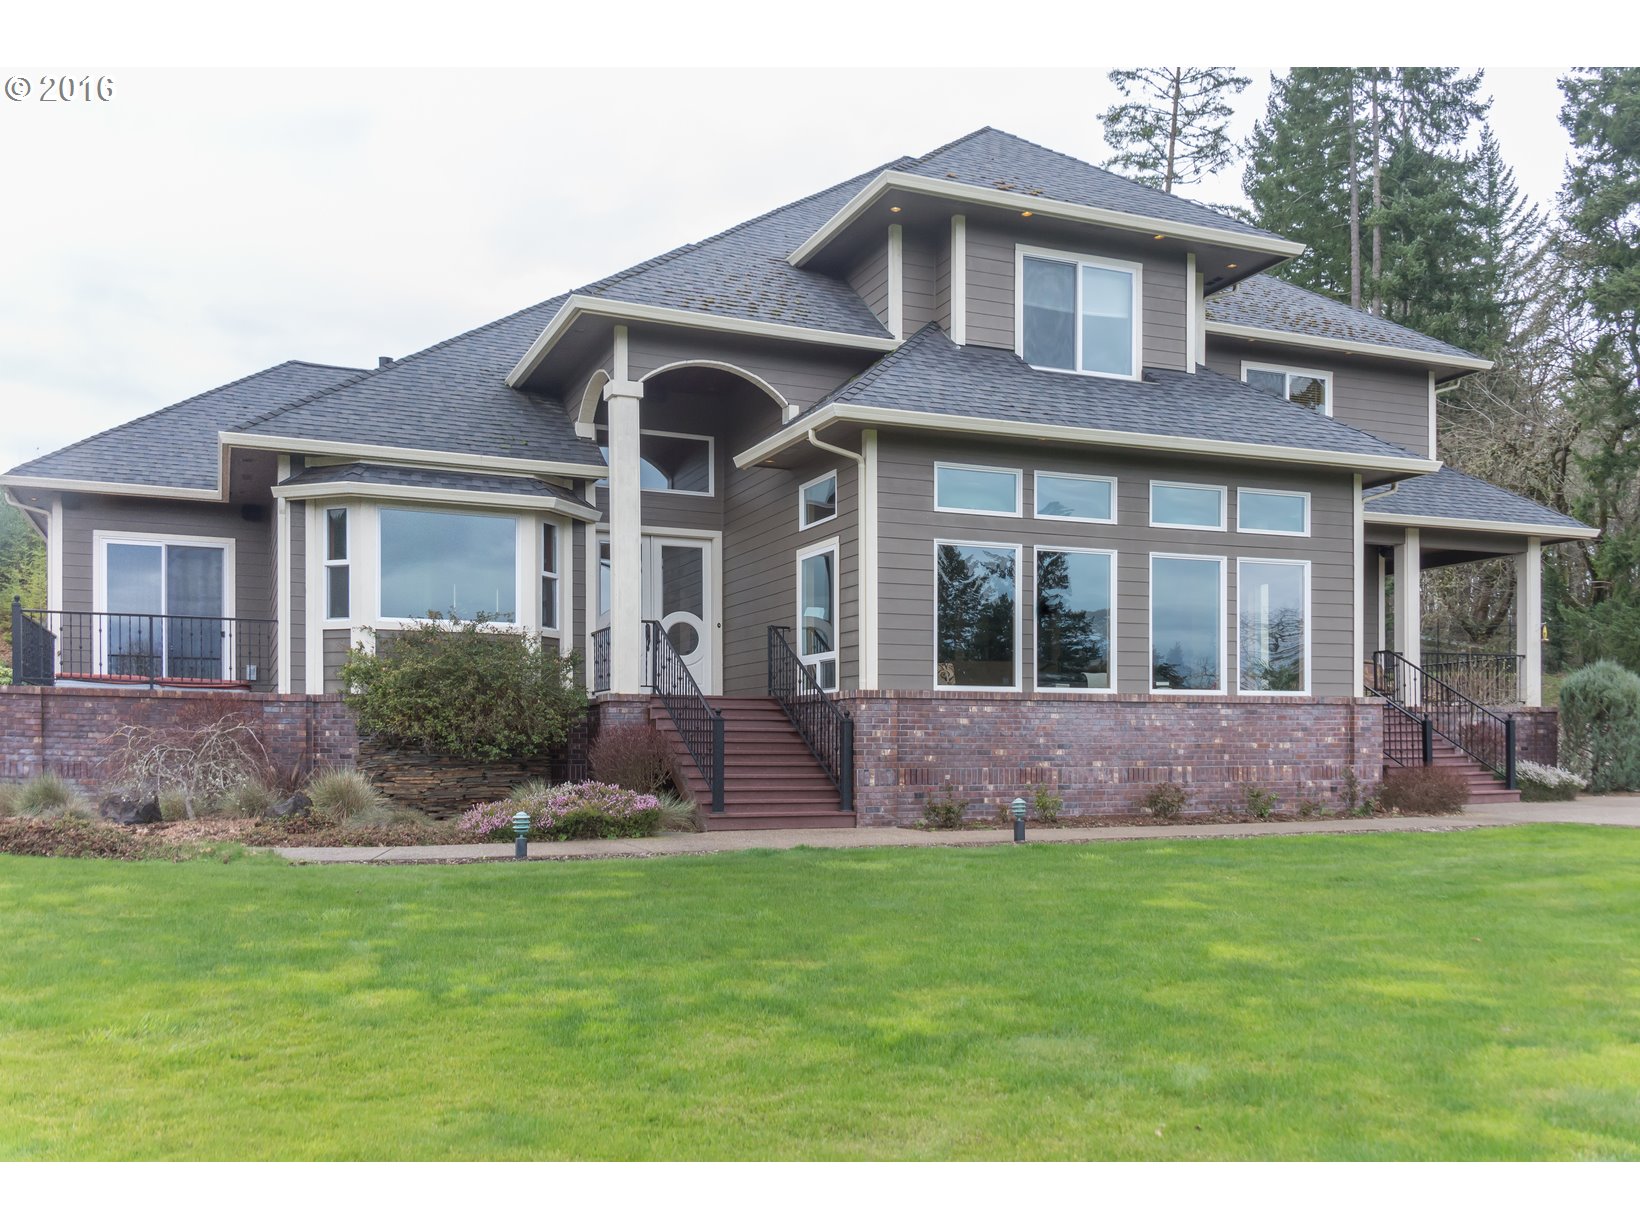 34394 DEERWOOD DR Eugene Home Listings - Real Pro Systems Real Estate Marketing